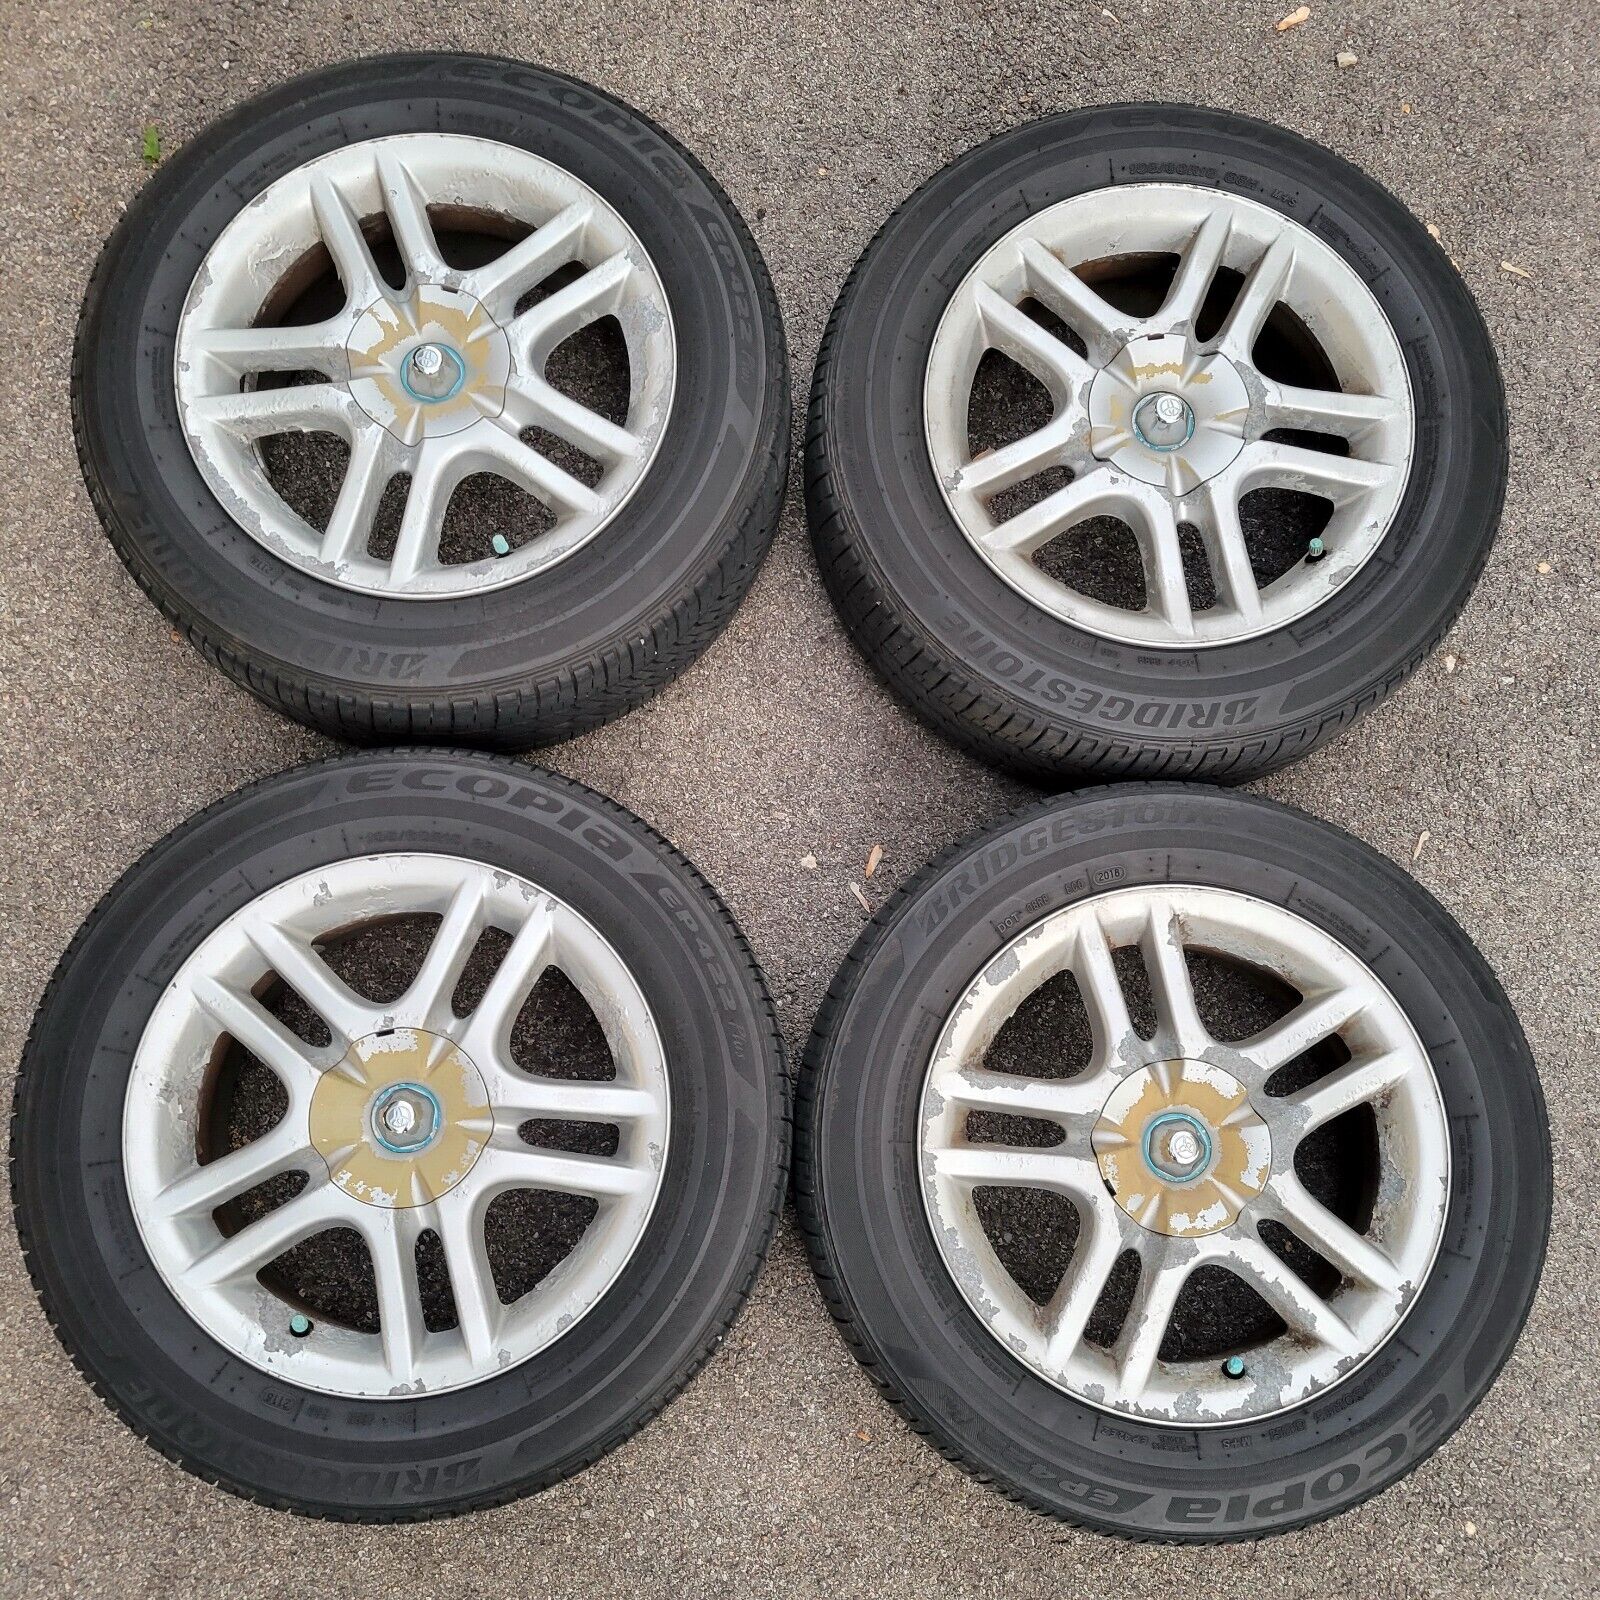 Four OEM wheels with good tires for Toyota Celica 2000 2001 2002 2003 2004 2005